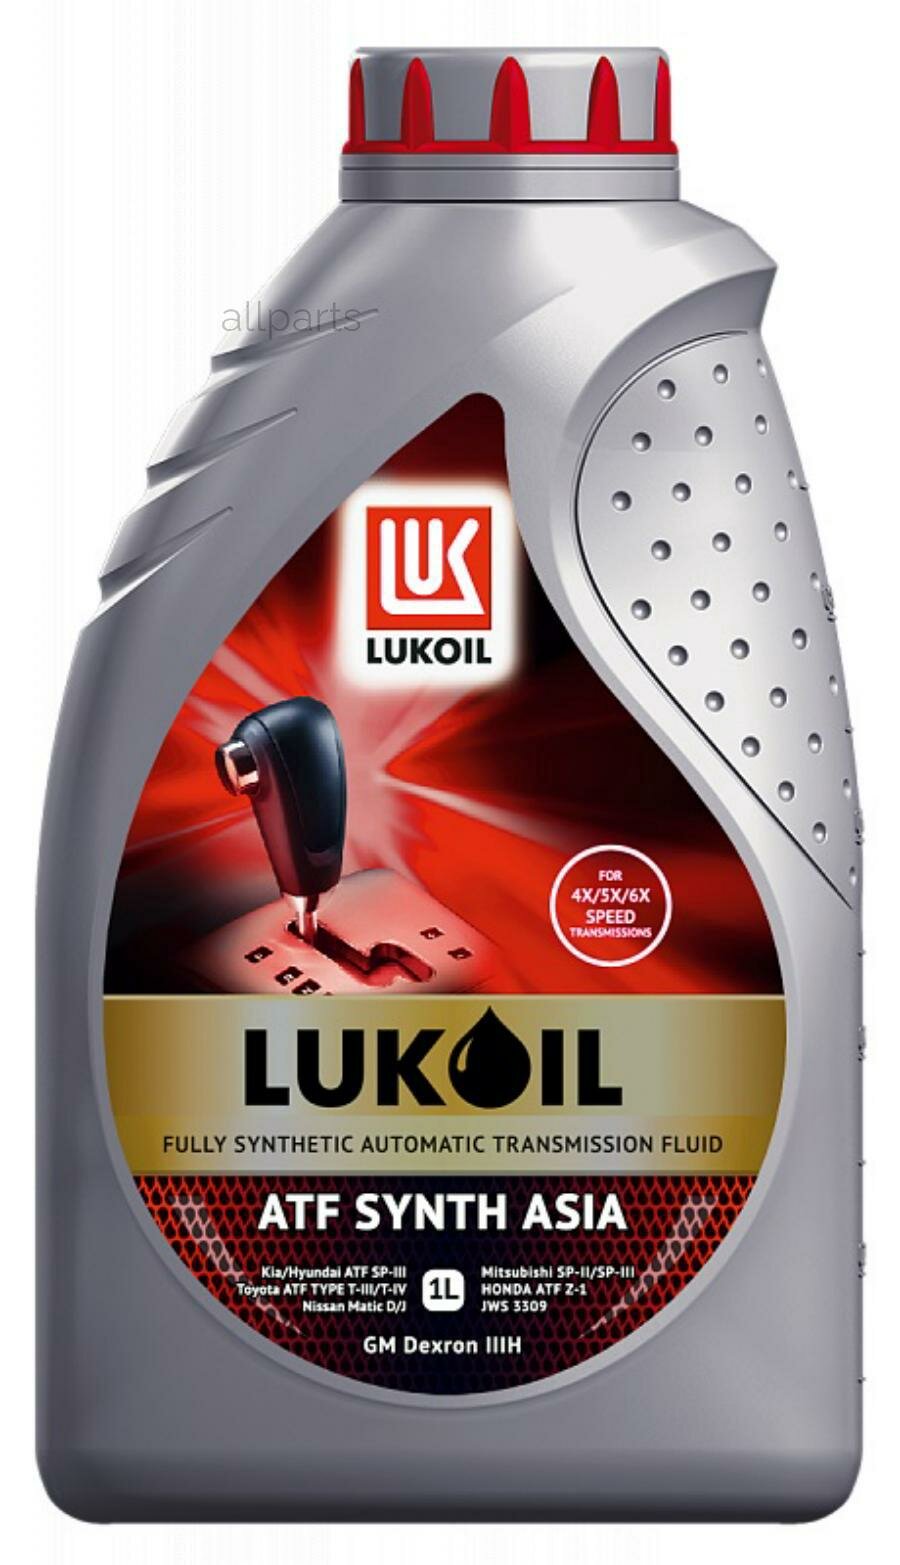 LUKOIL 3132619 Масло LUKOIL ATF SYNTH ASIA трансм. cинт 1L